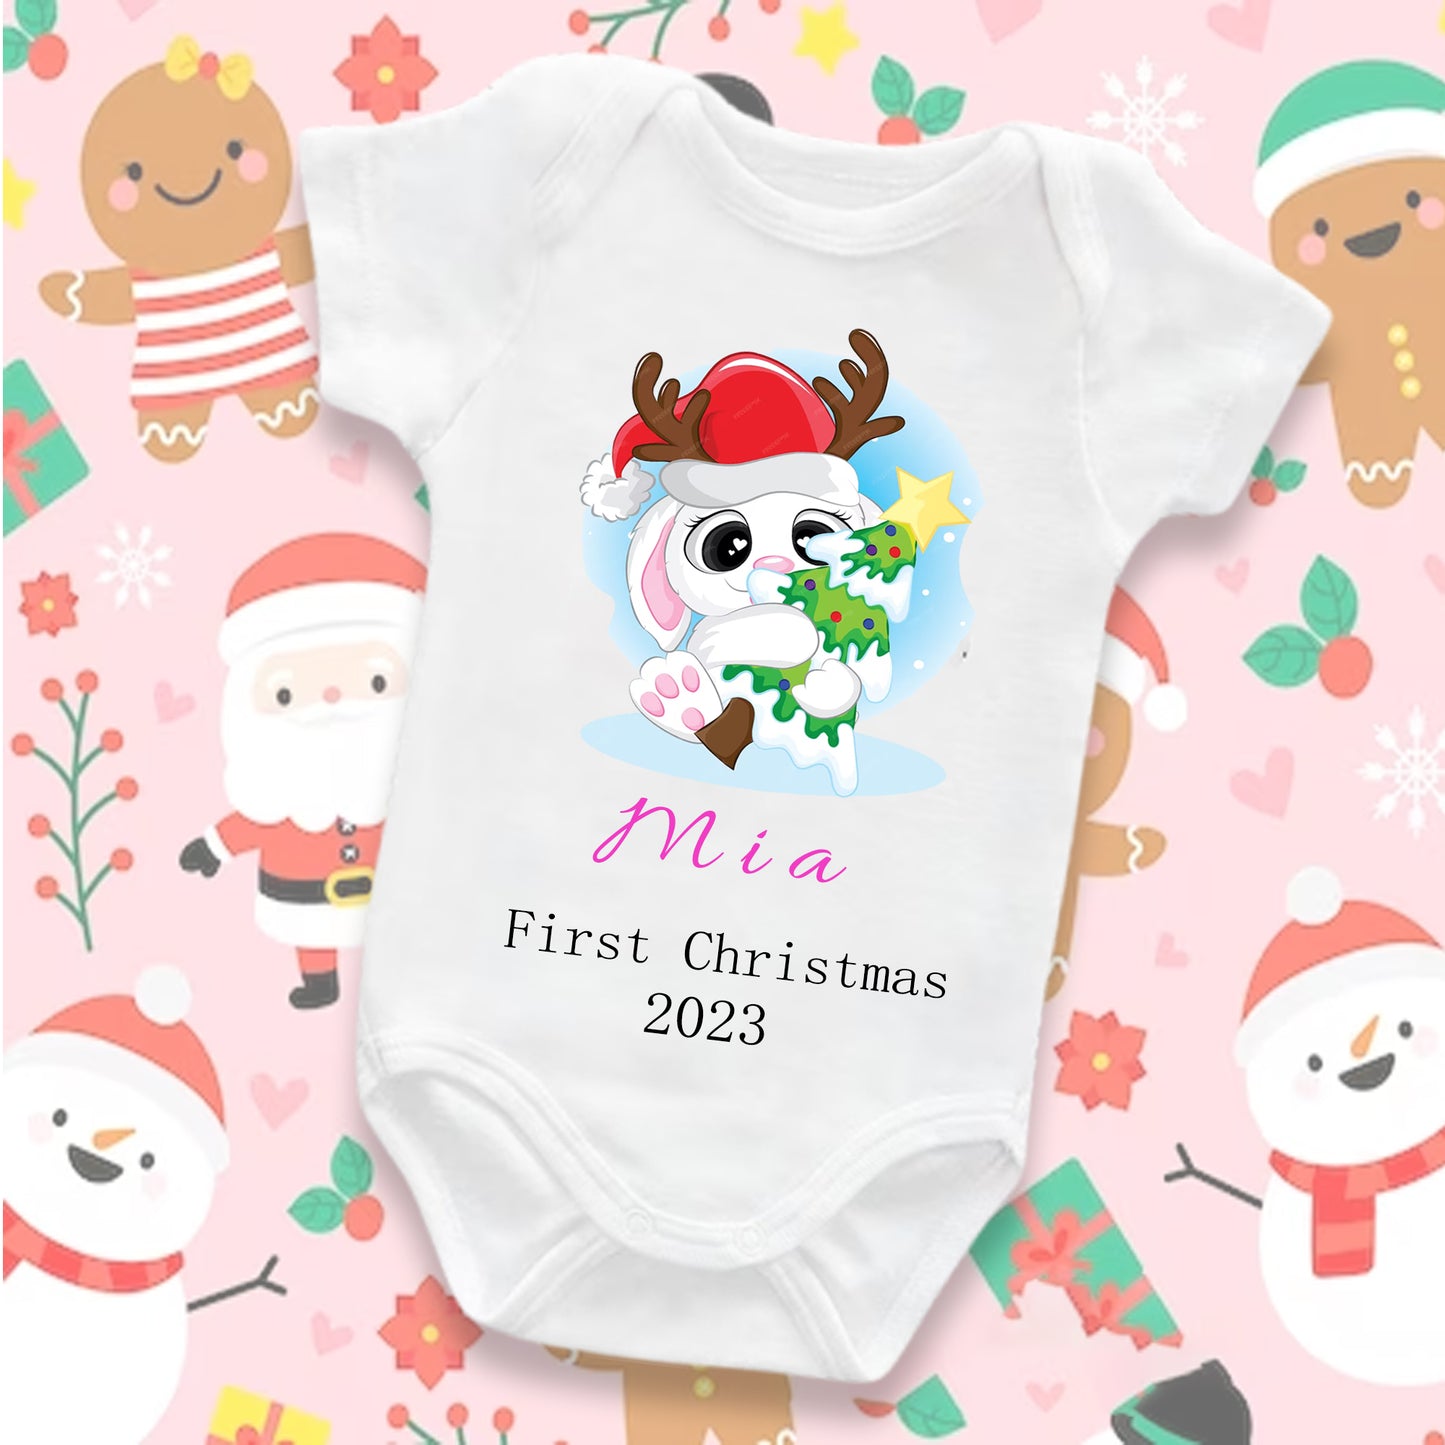 Personalized Baby's 1st Christmas Sleepsuit